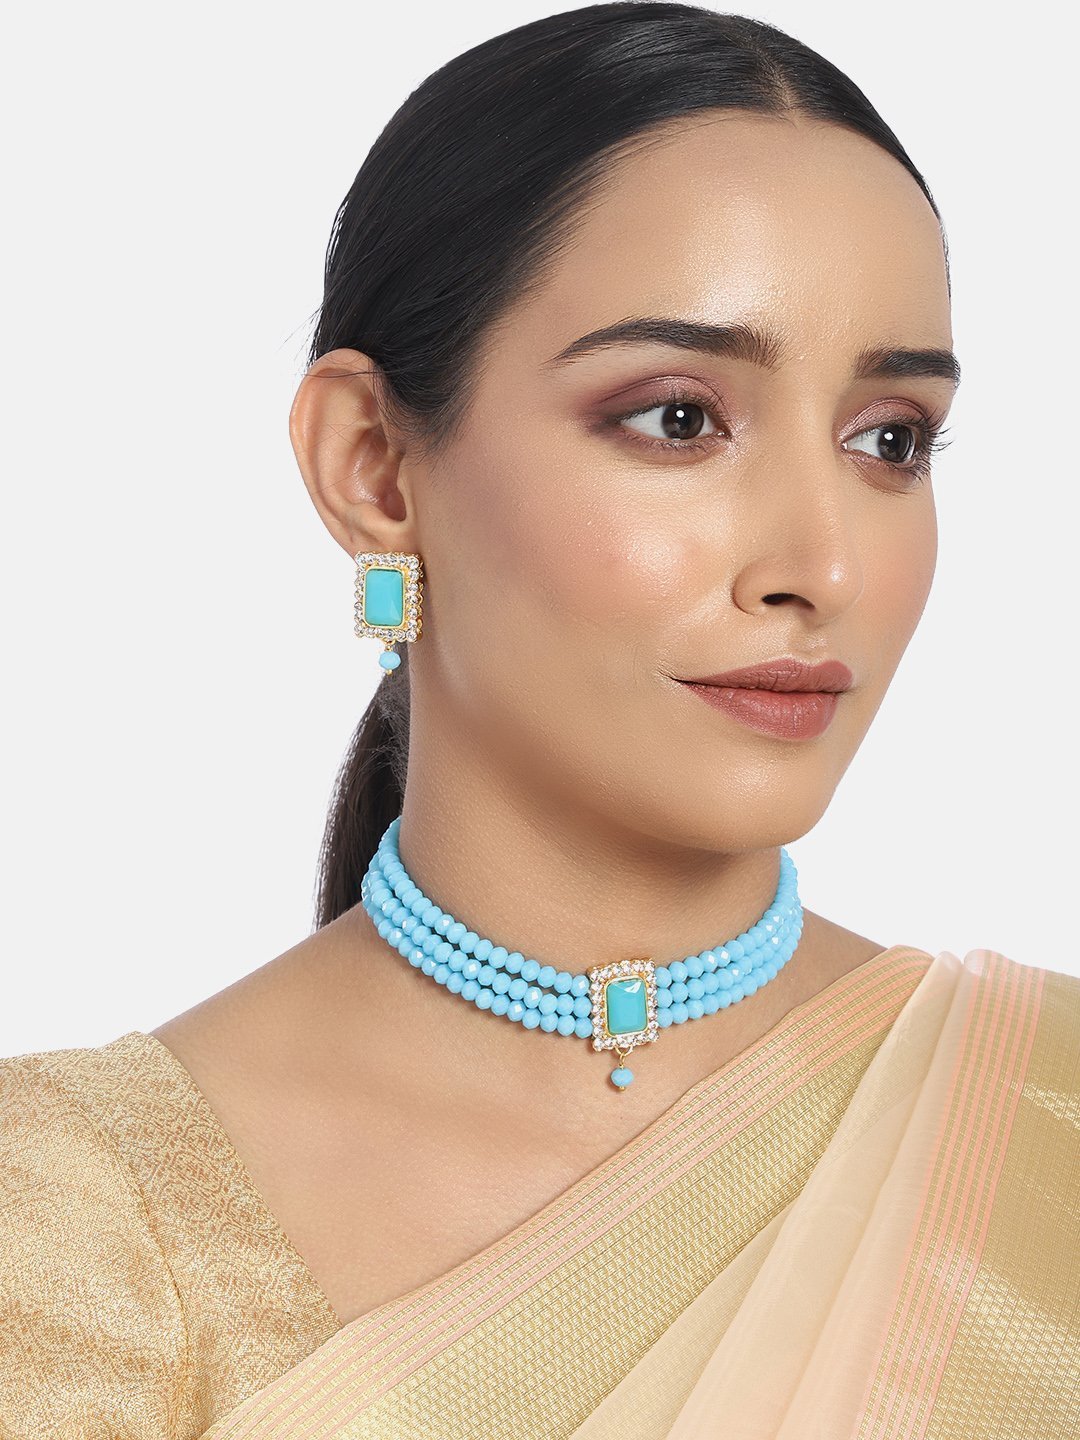 Women's  Gold Plated Traditional Handcrafted Turquoise Crystal Stone Beaded Choker Necklace Jewellery Set With Earrings - i jewels